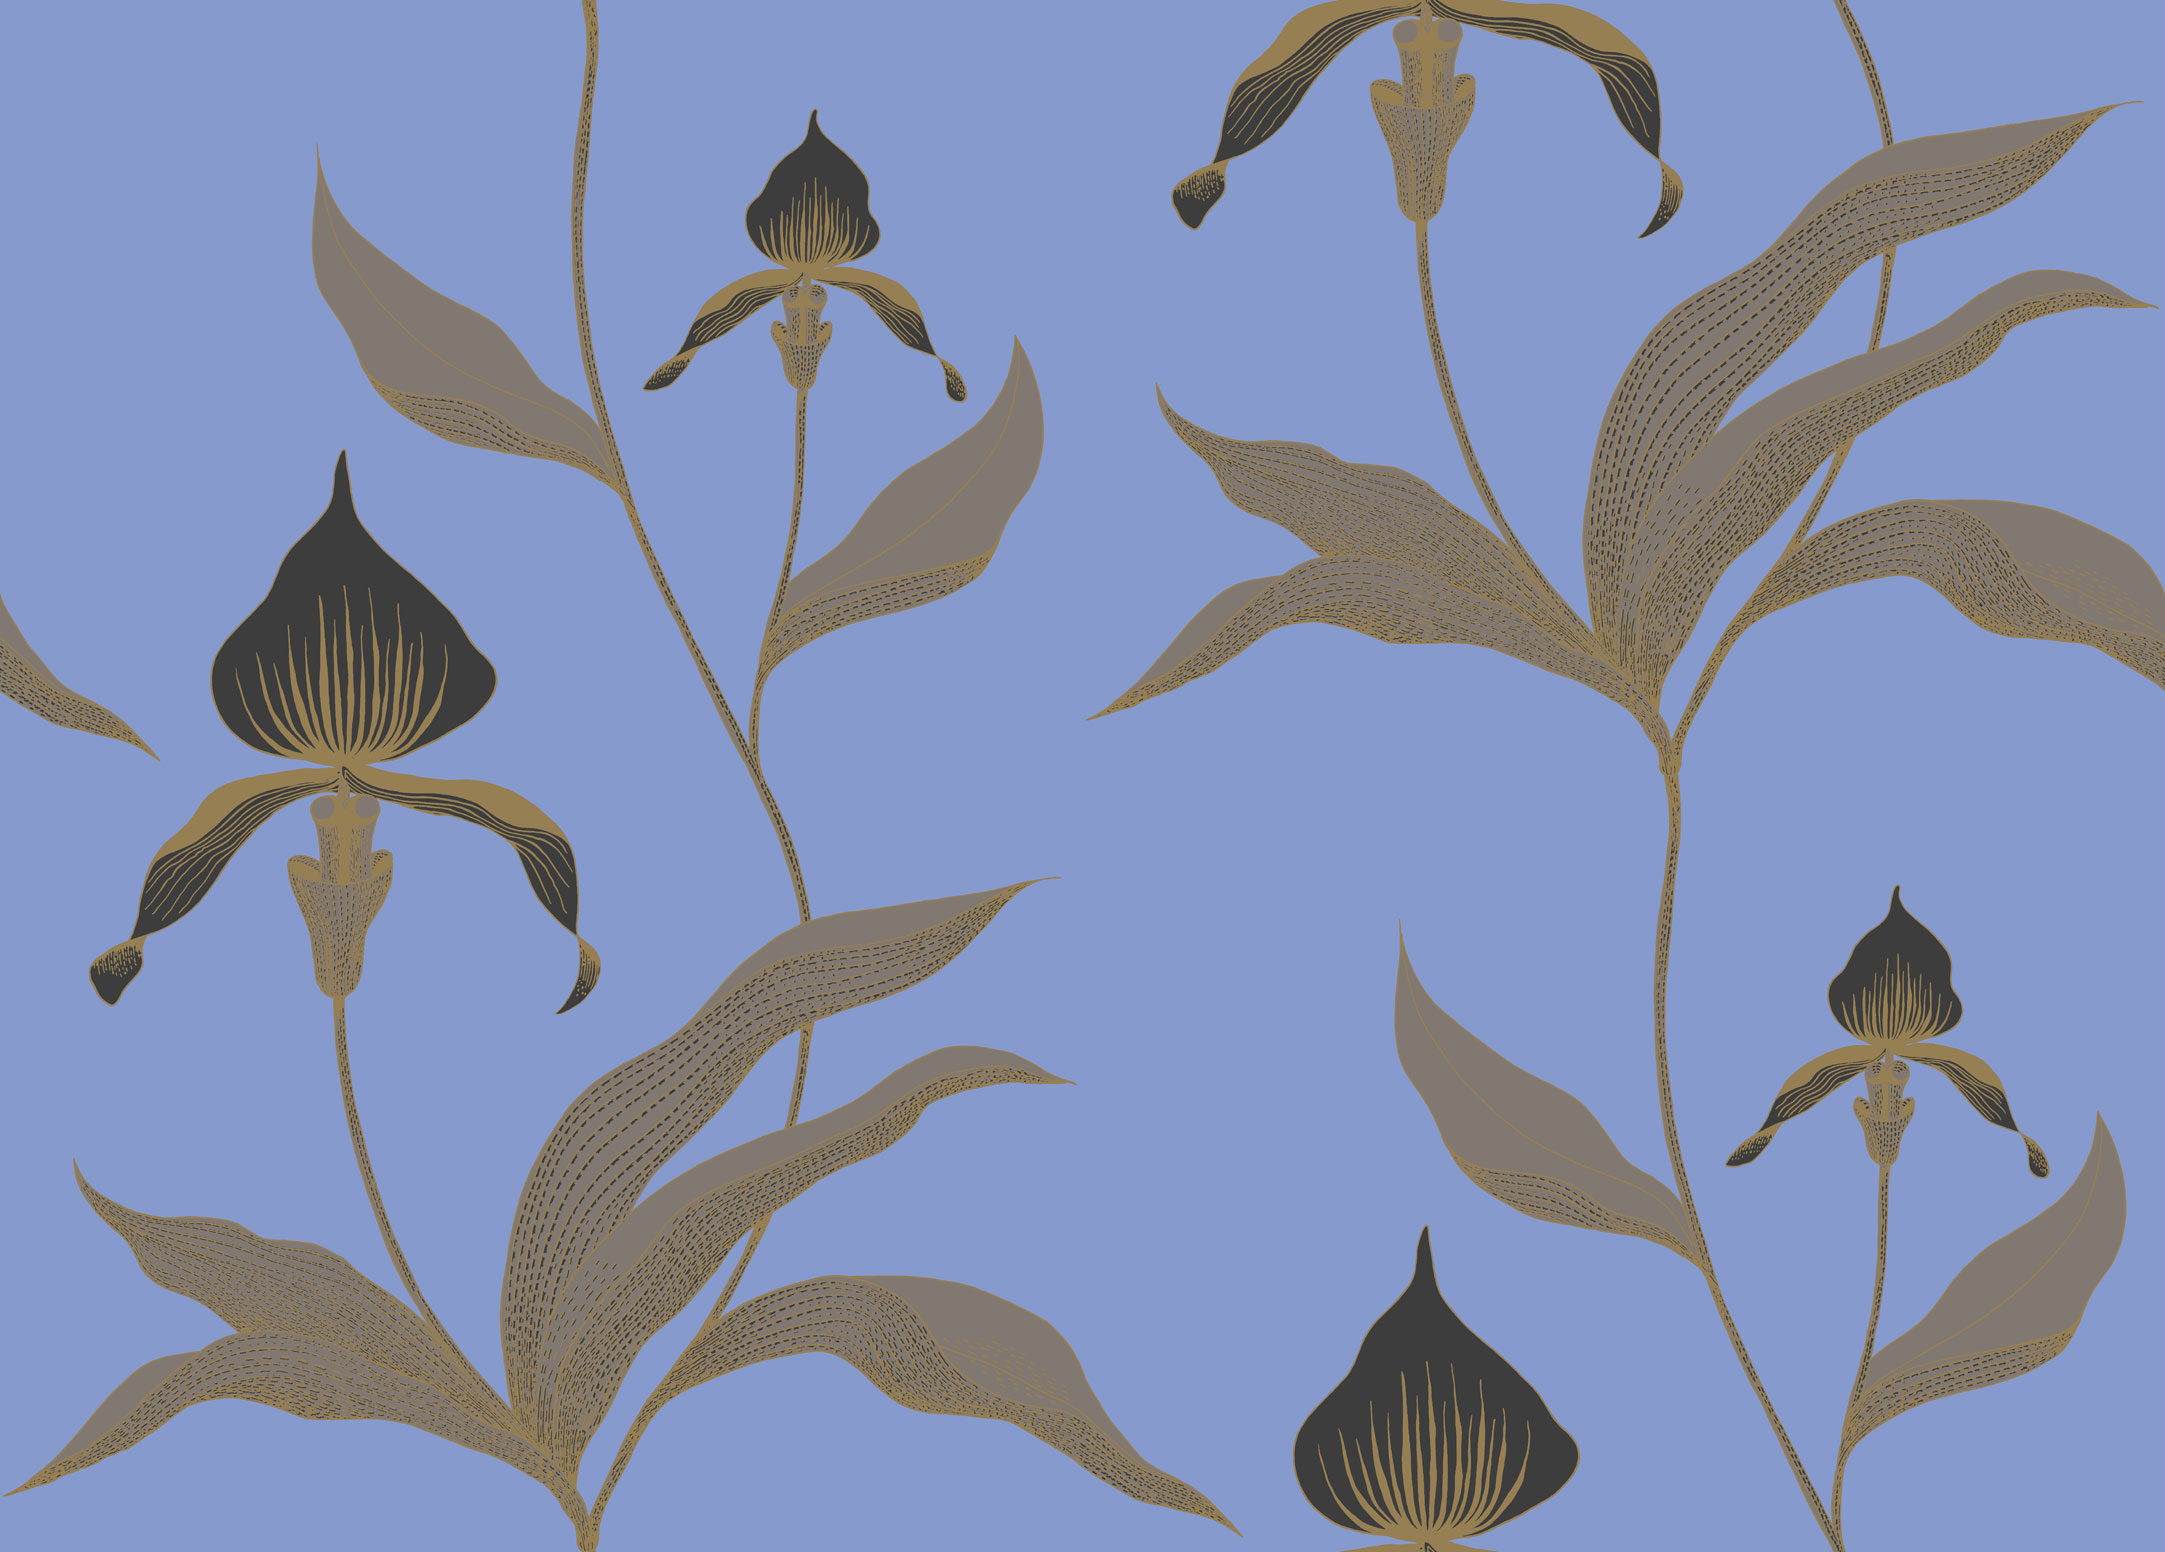 Wallpaper - Cole and Son - New Contemporary- Orchid - Yellow